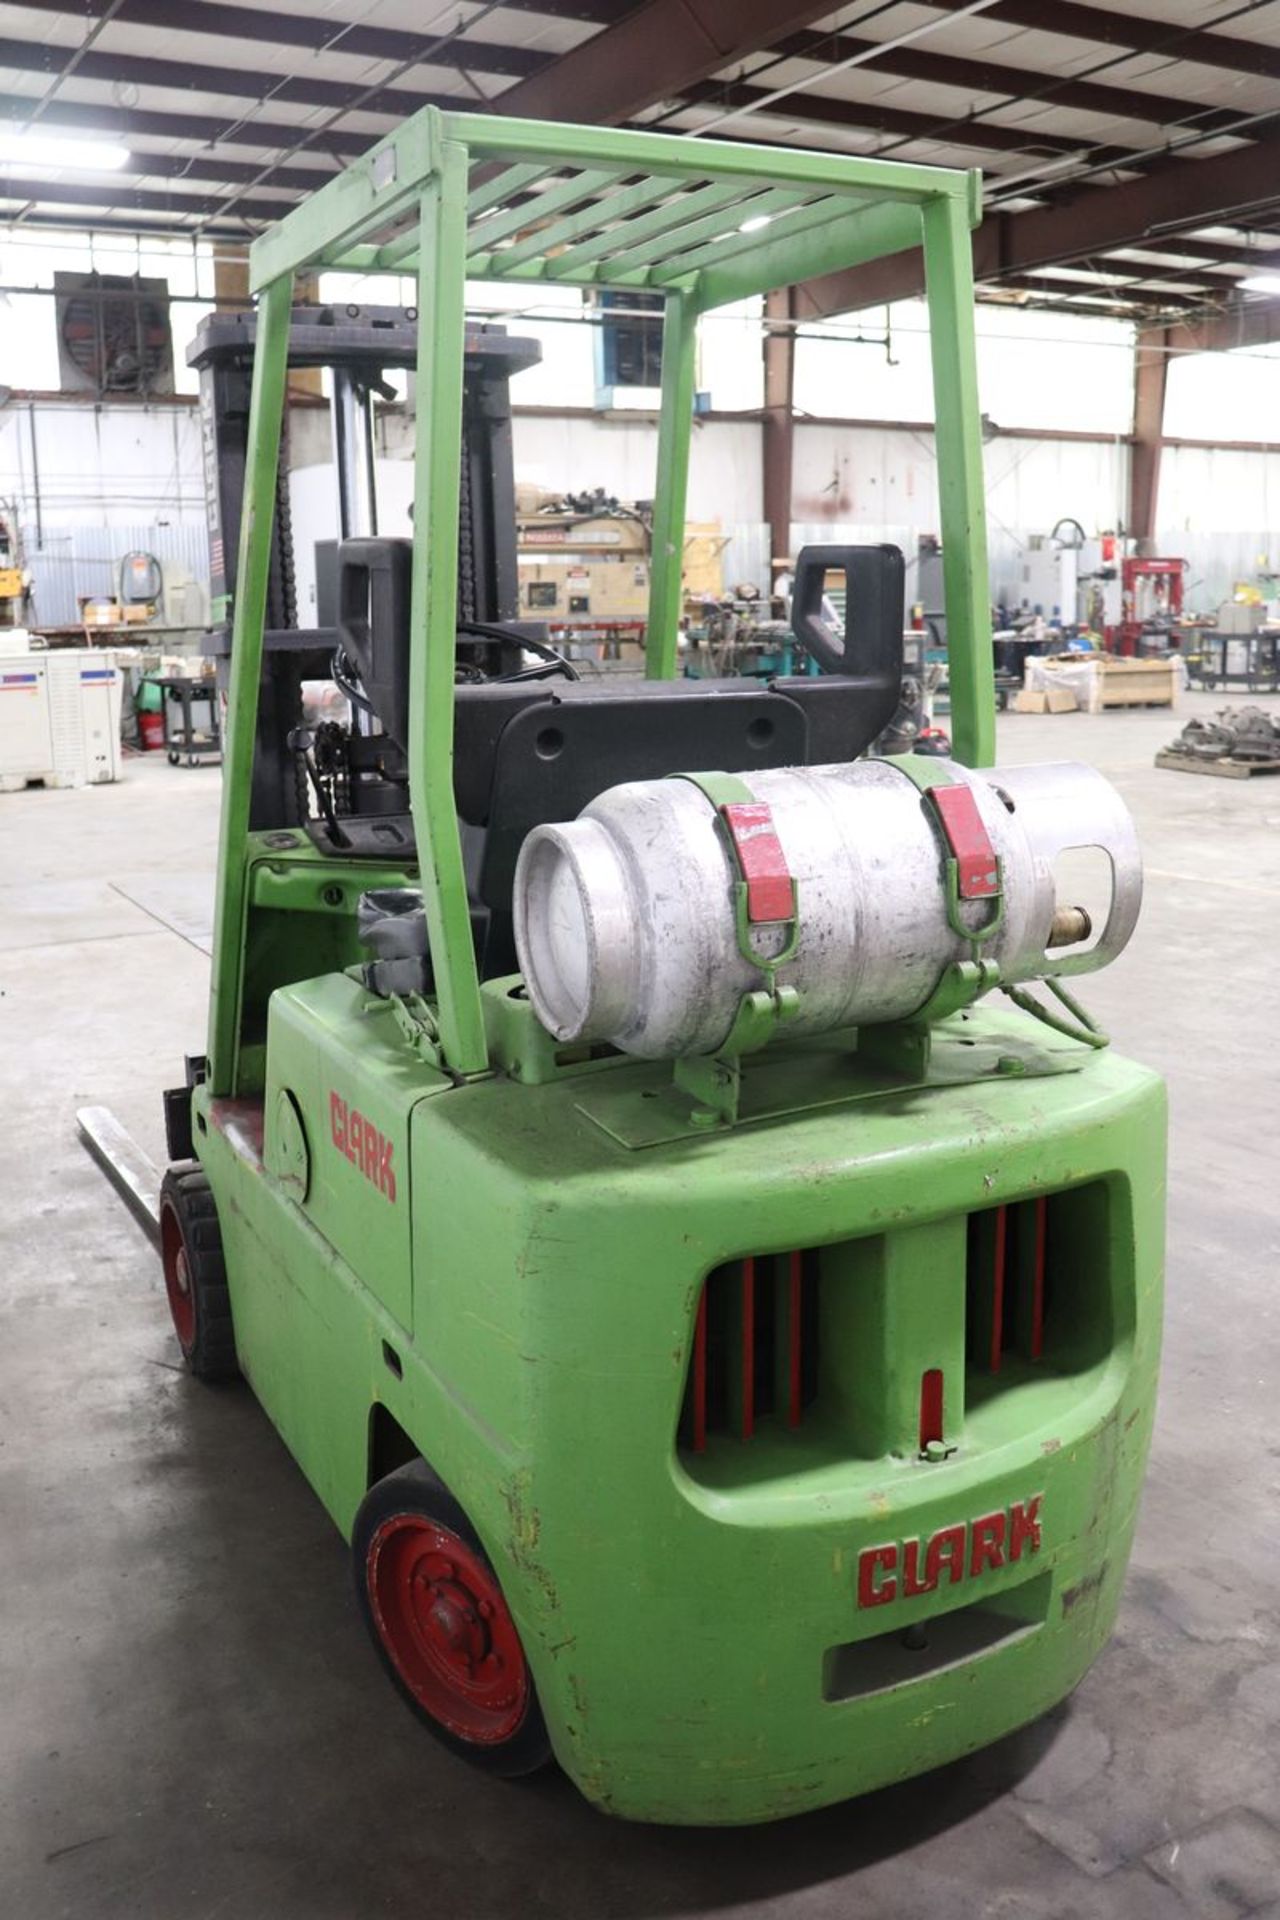 Clark C500-50 5,000 Lb. Capacity 3 Stage Propane Forklift - Image 9 of 14